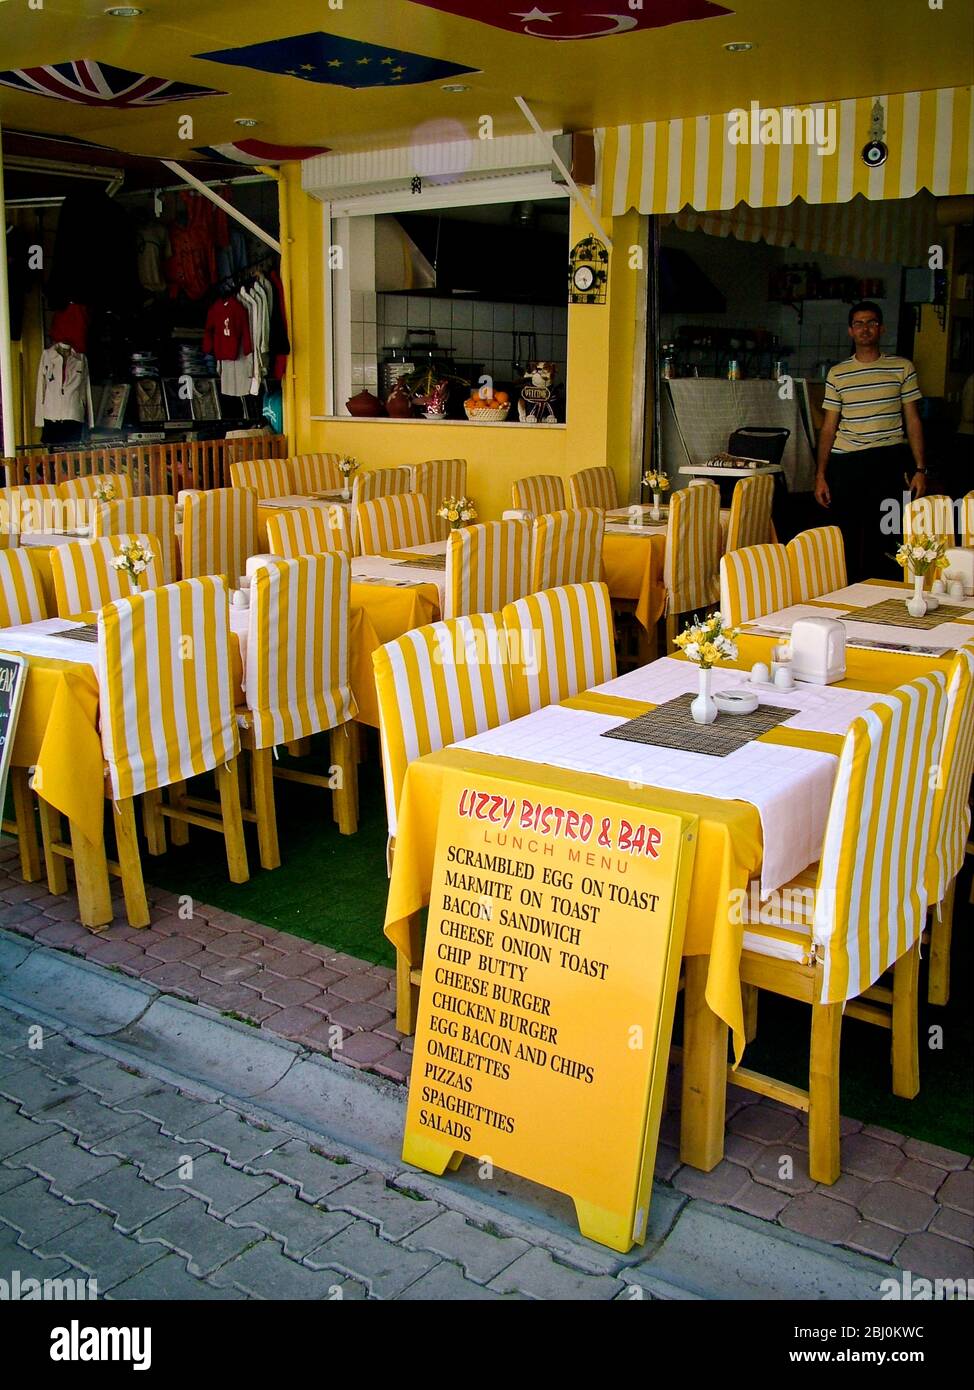 Smart yellow and white striped restaurant in Dalyan, southern Turkey - Stock Photo